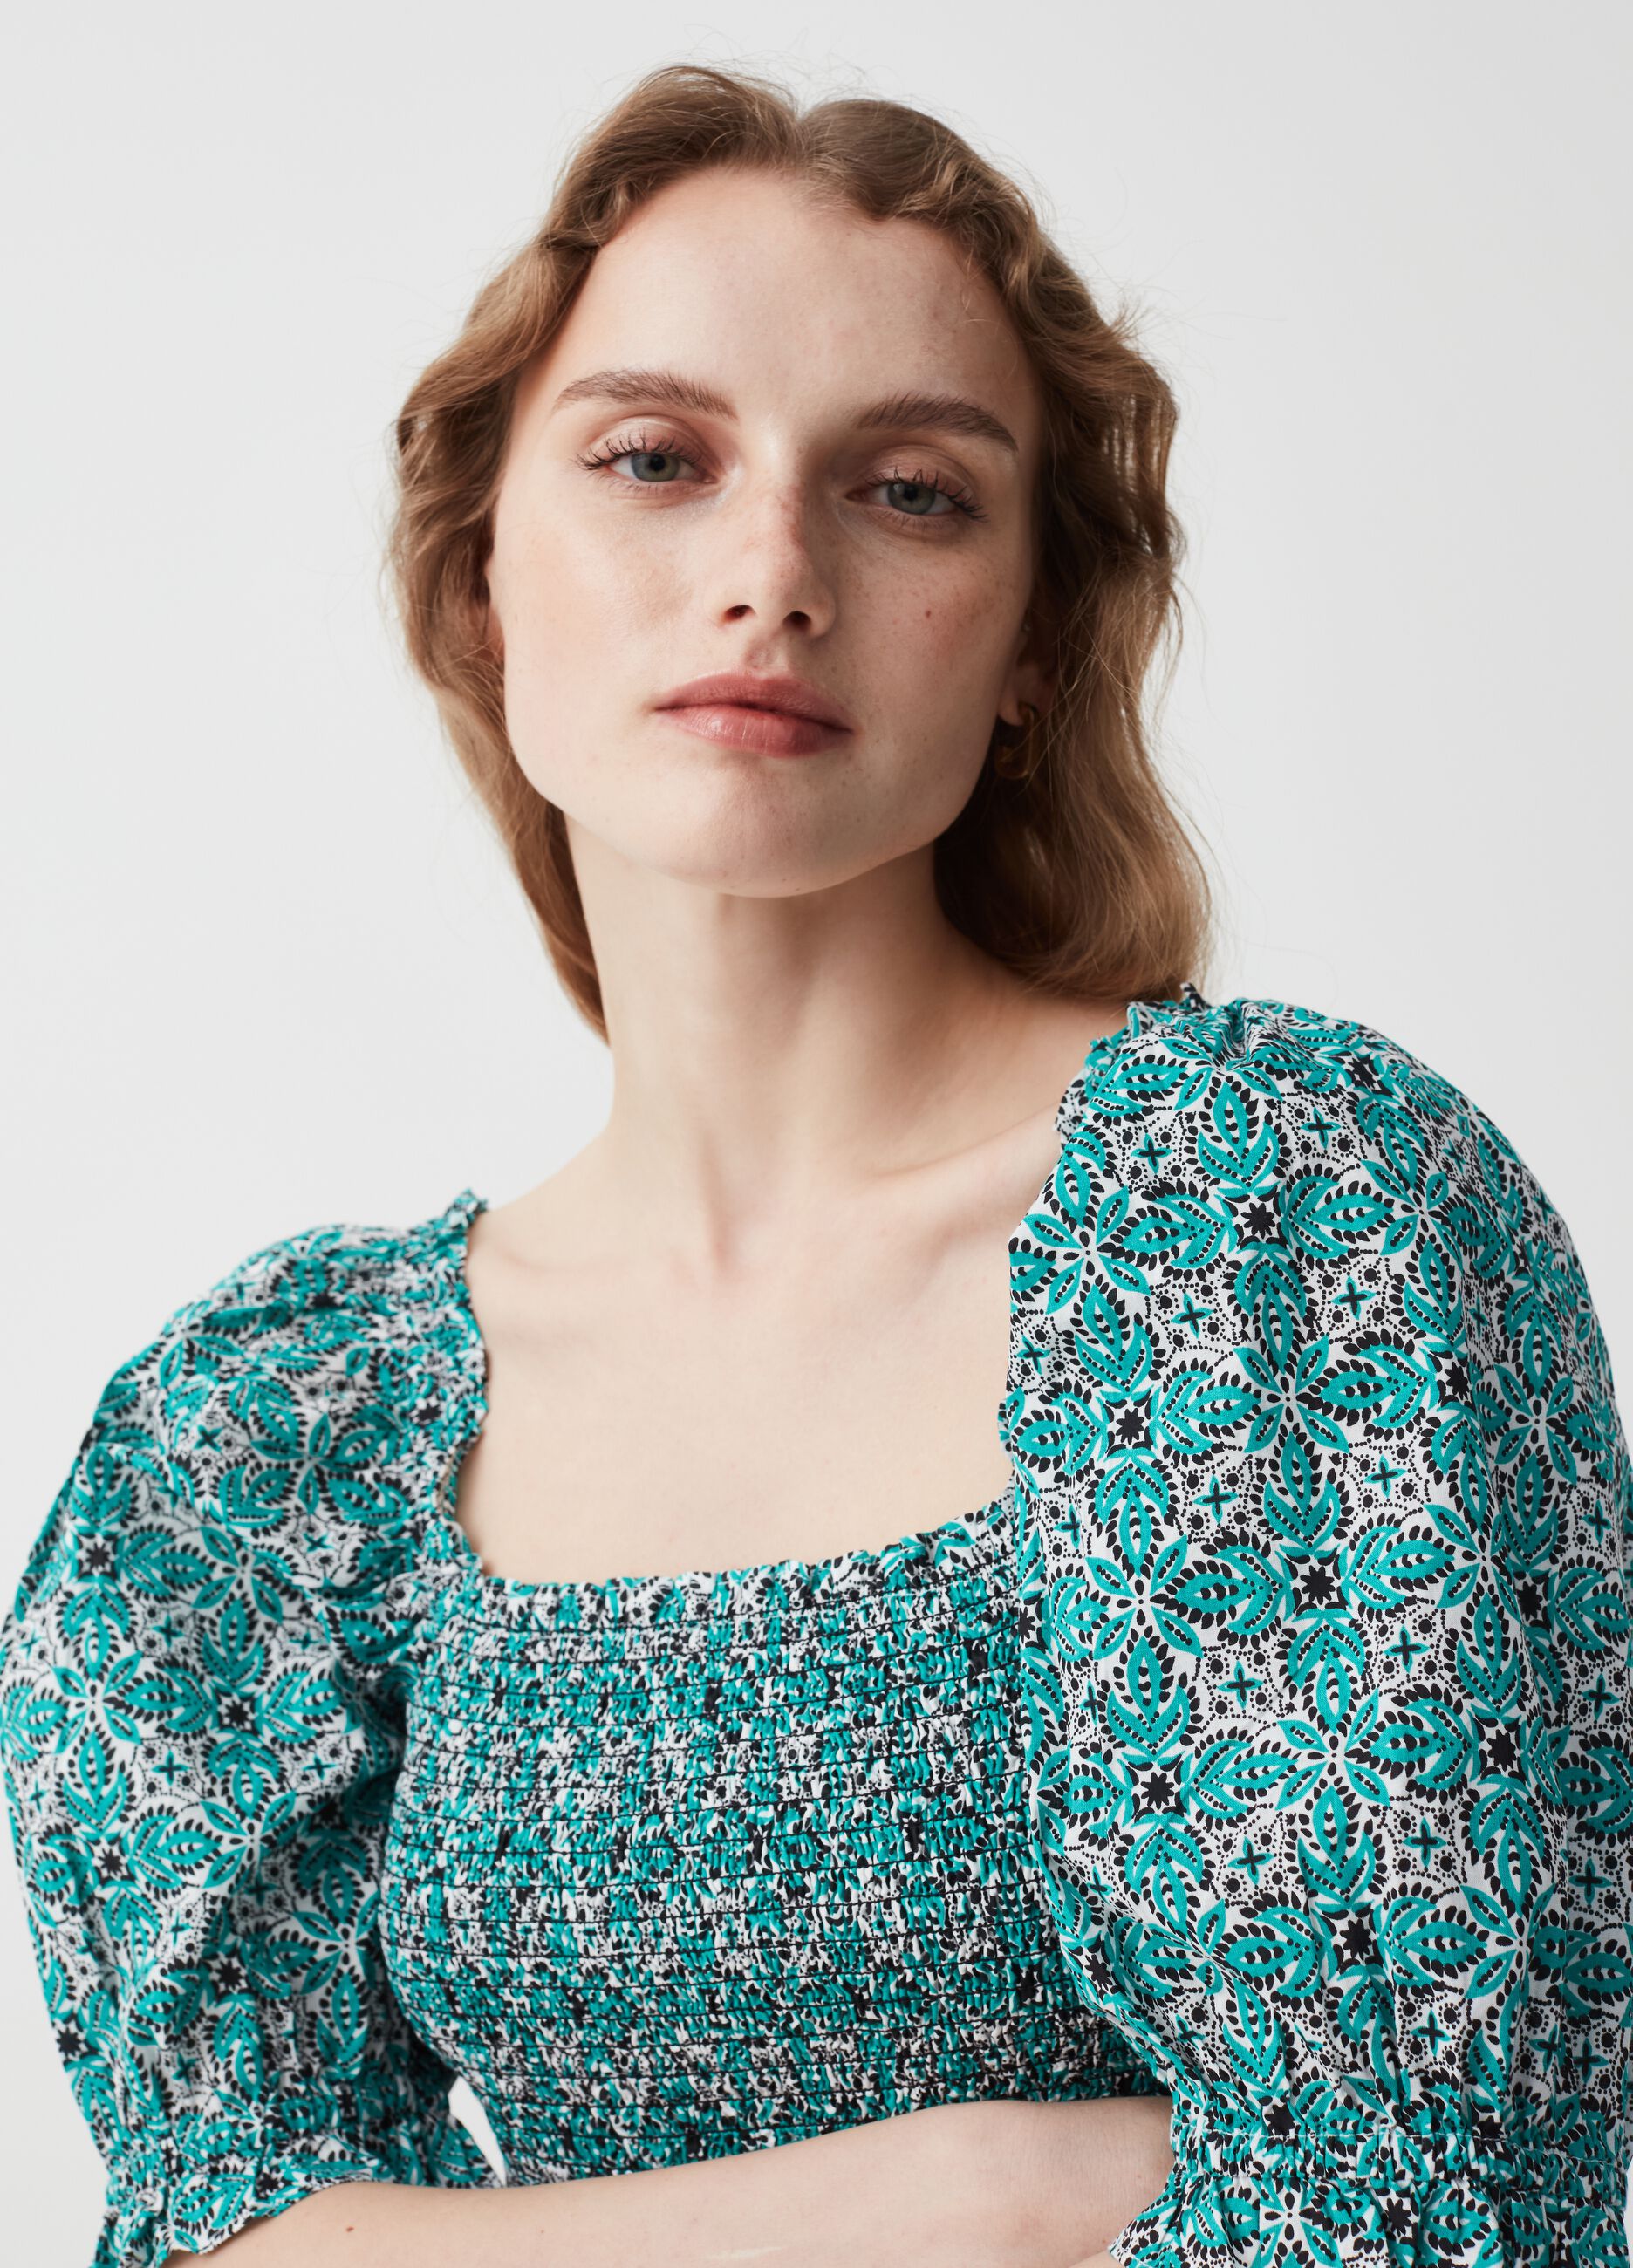 Crop top with smock stitch and paisley print